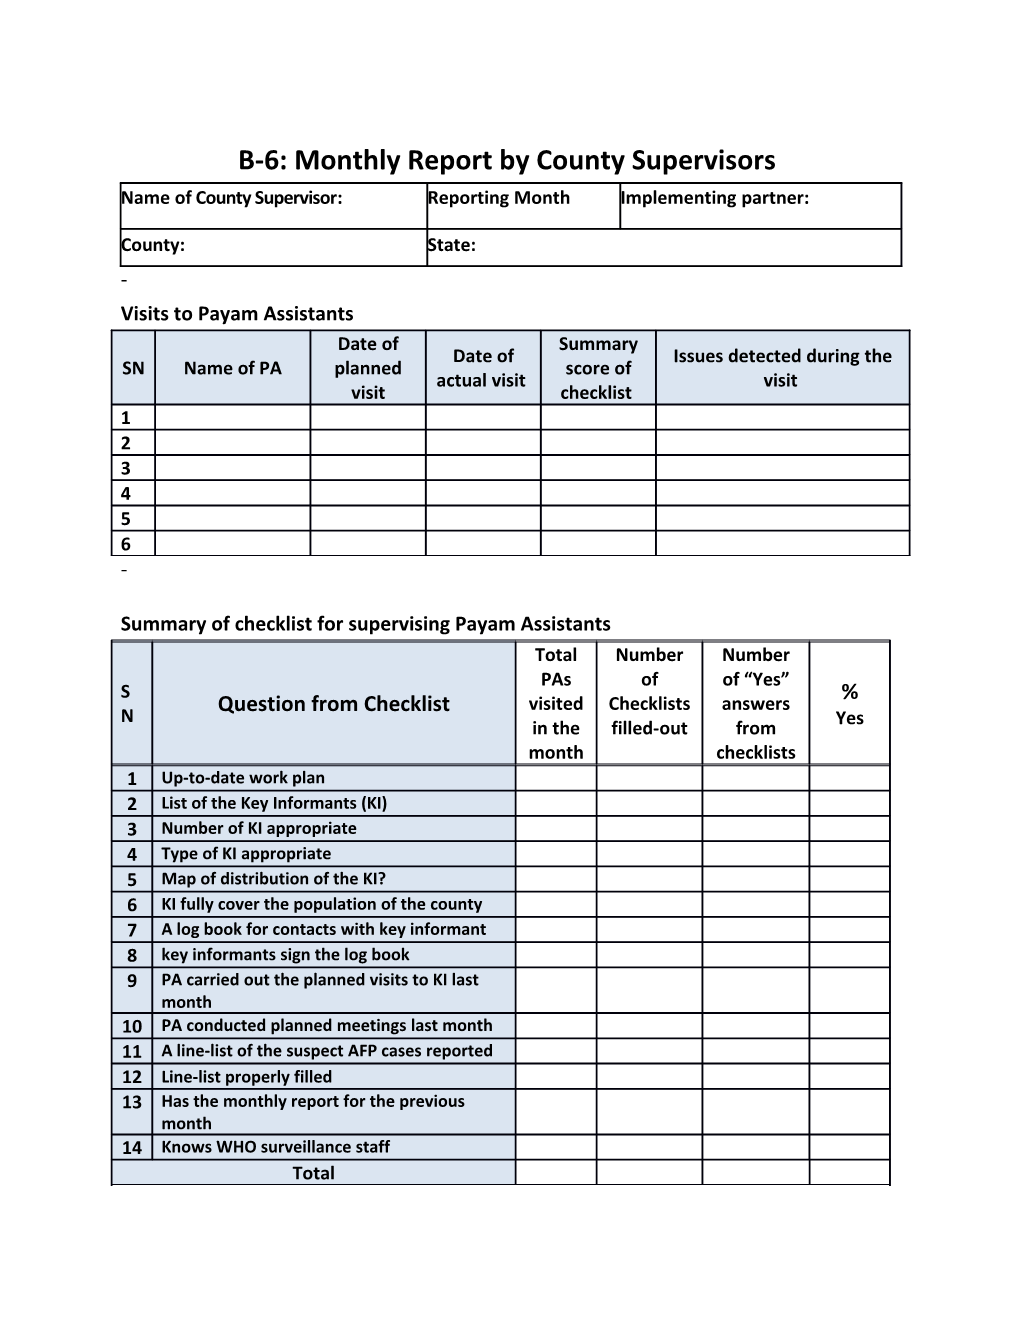 B-6: Monthly Report by County Supervisors